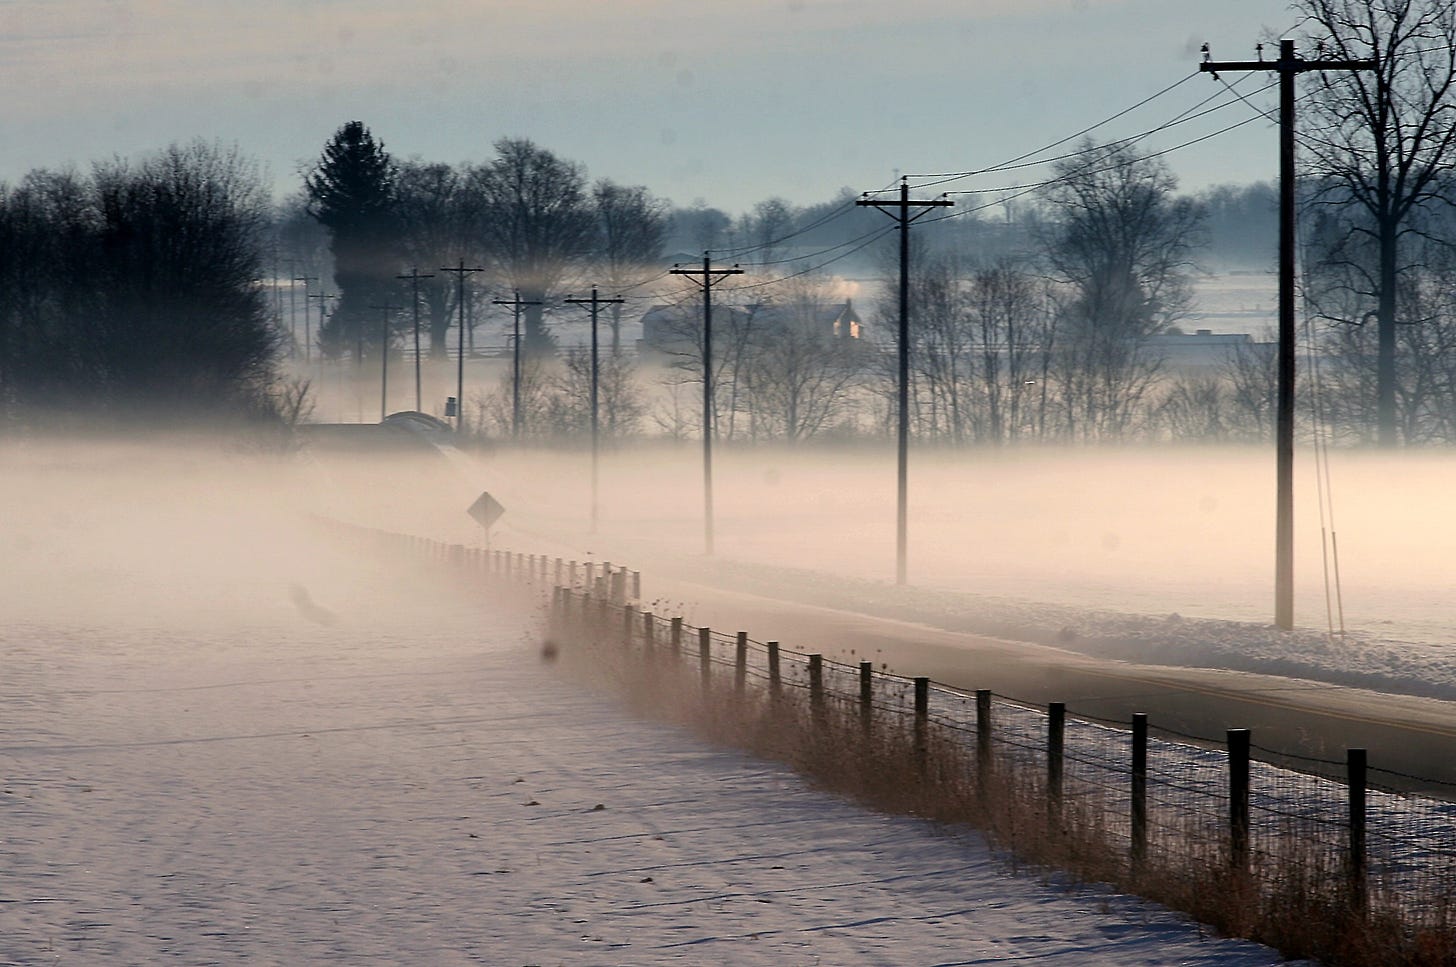 A dangerous yet beautiful combination of fog and snow.